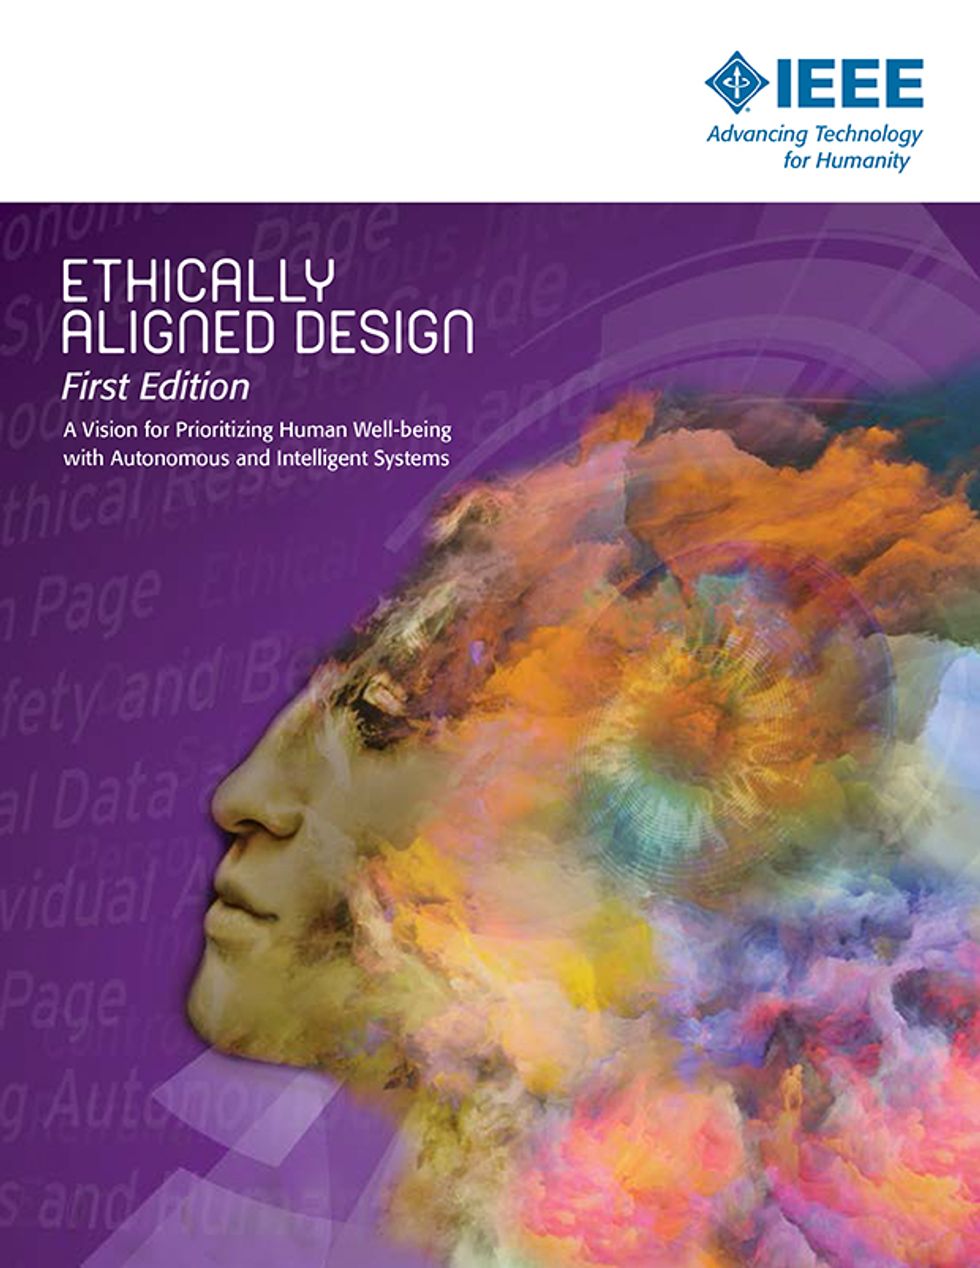 Image of the cover of the book \u201cEthically Aligned Design\u201d.